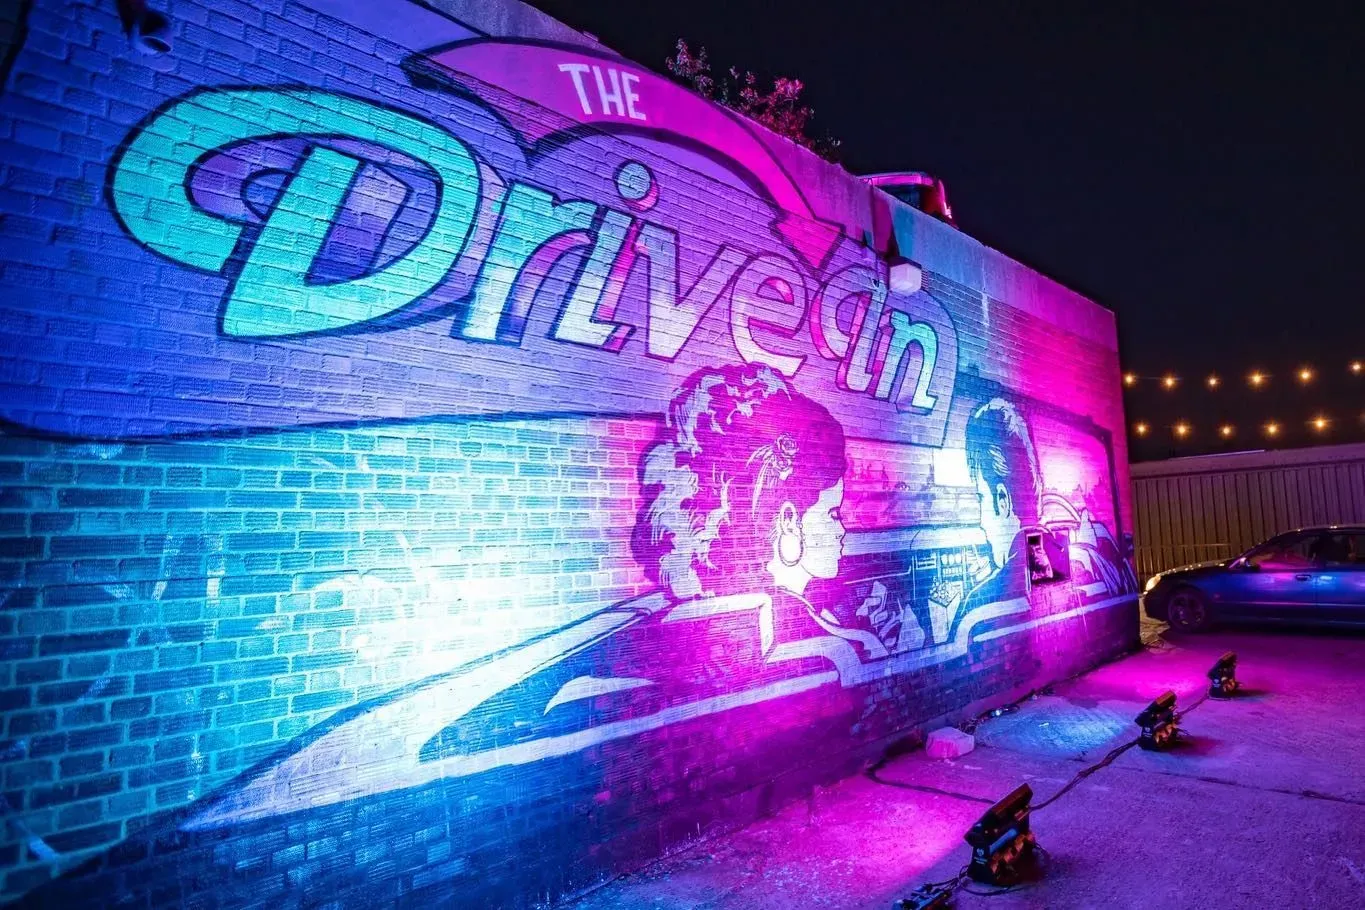 The Drive In logo projected against a wall in blue and purple.